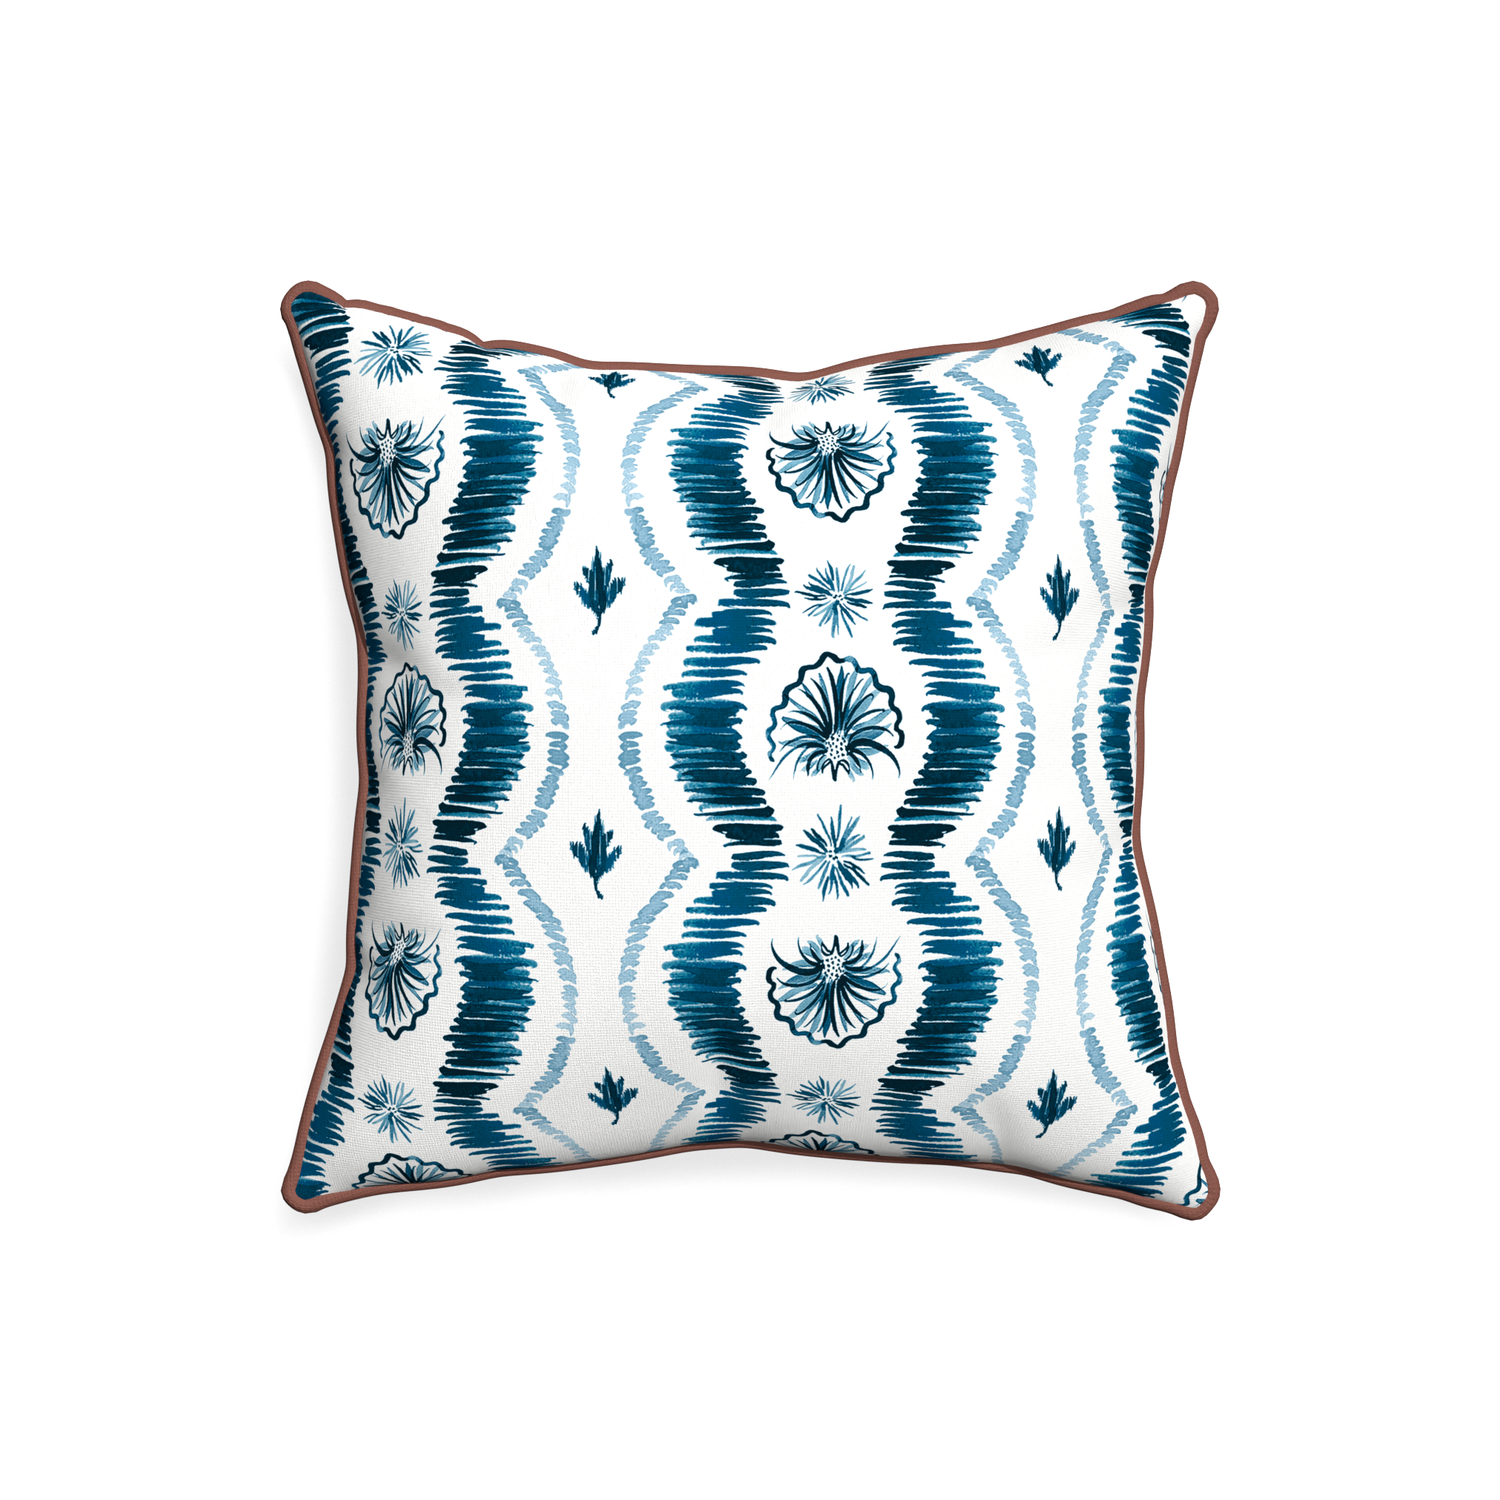 20-square alice custom blue ikatpillow with w piping on white background